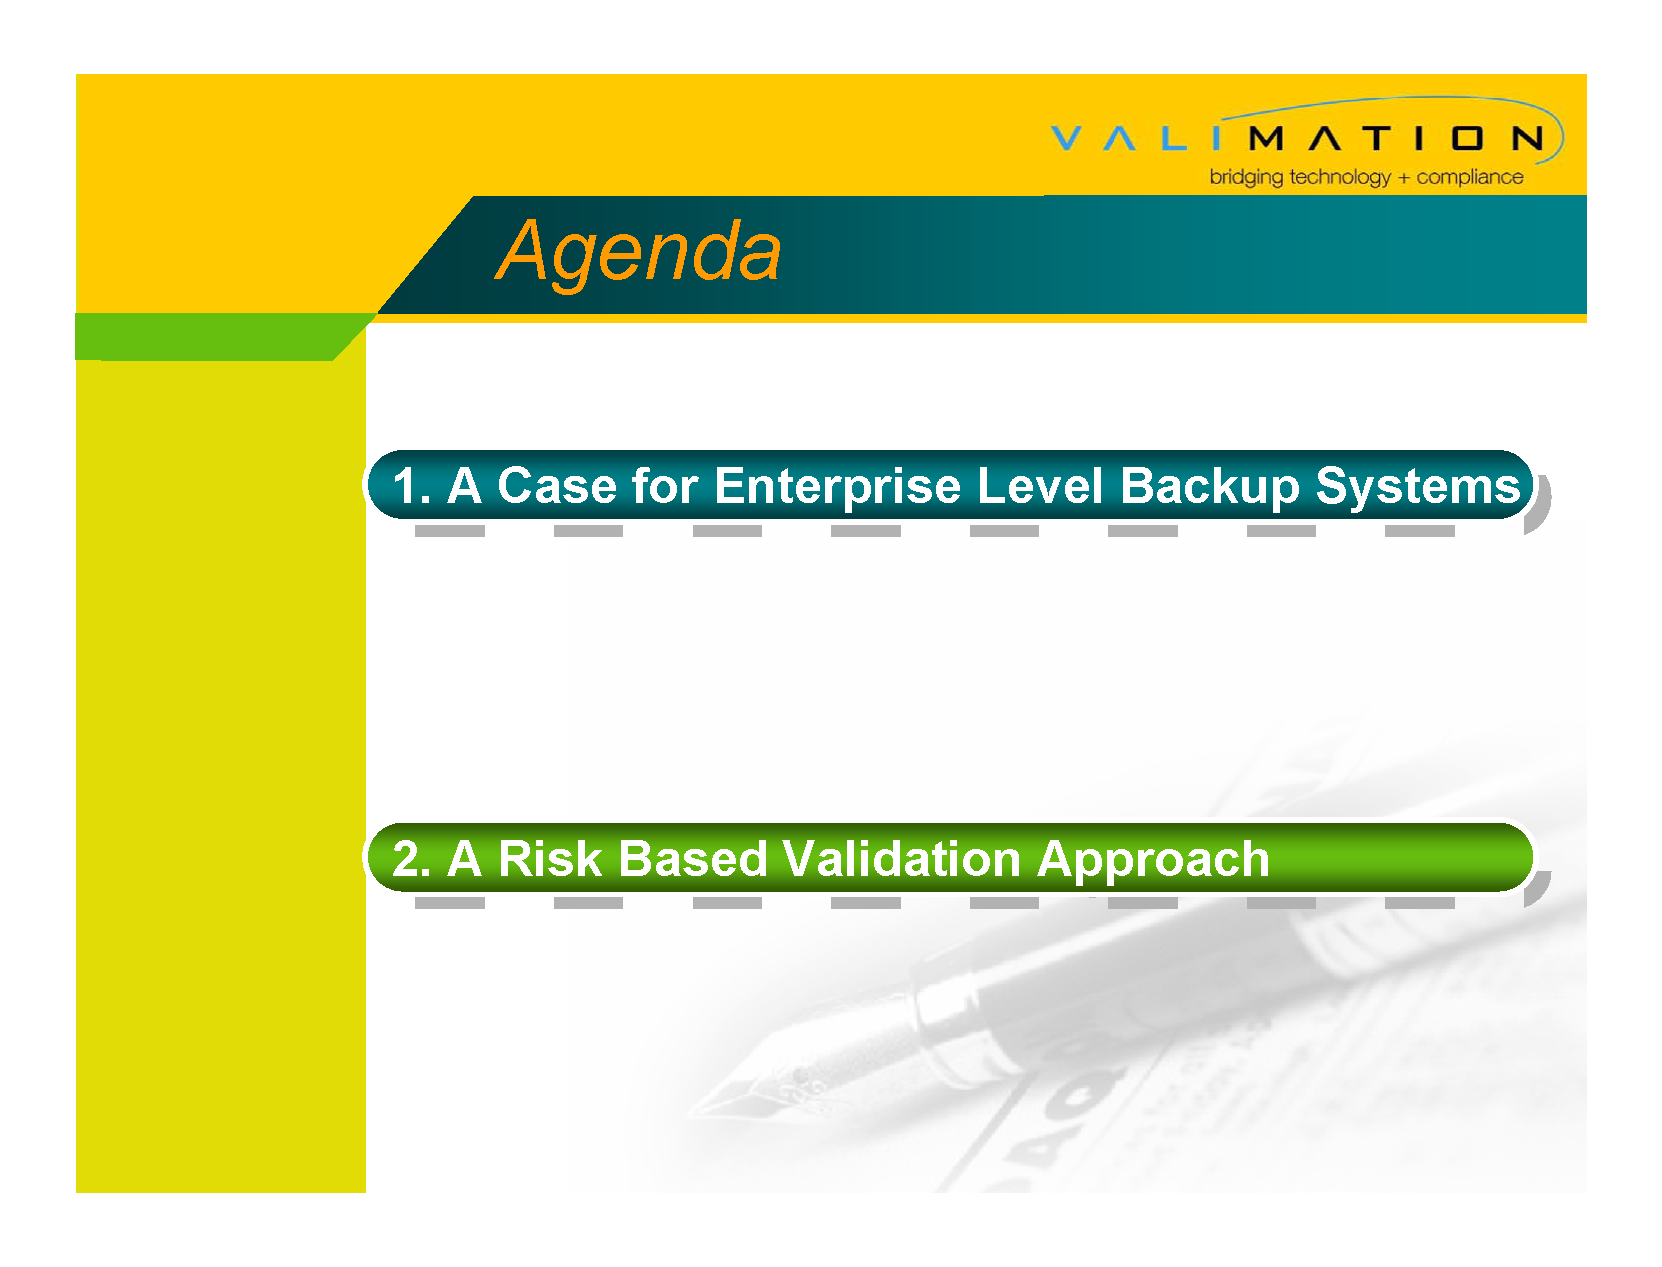 Validating an Enterprise Backup System by ValiMation_Page_02.png